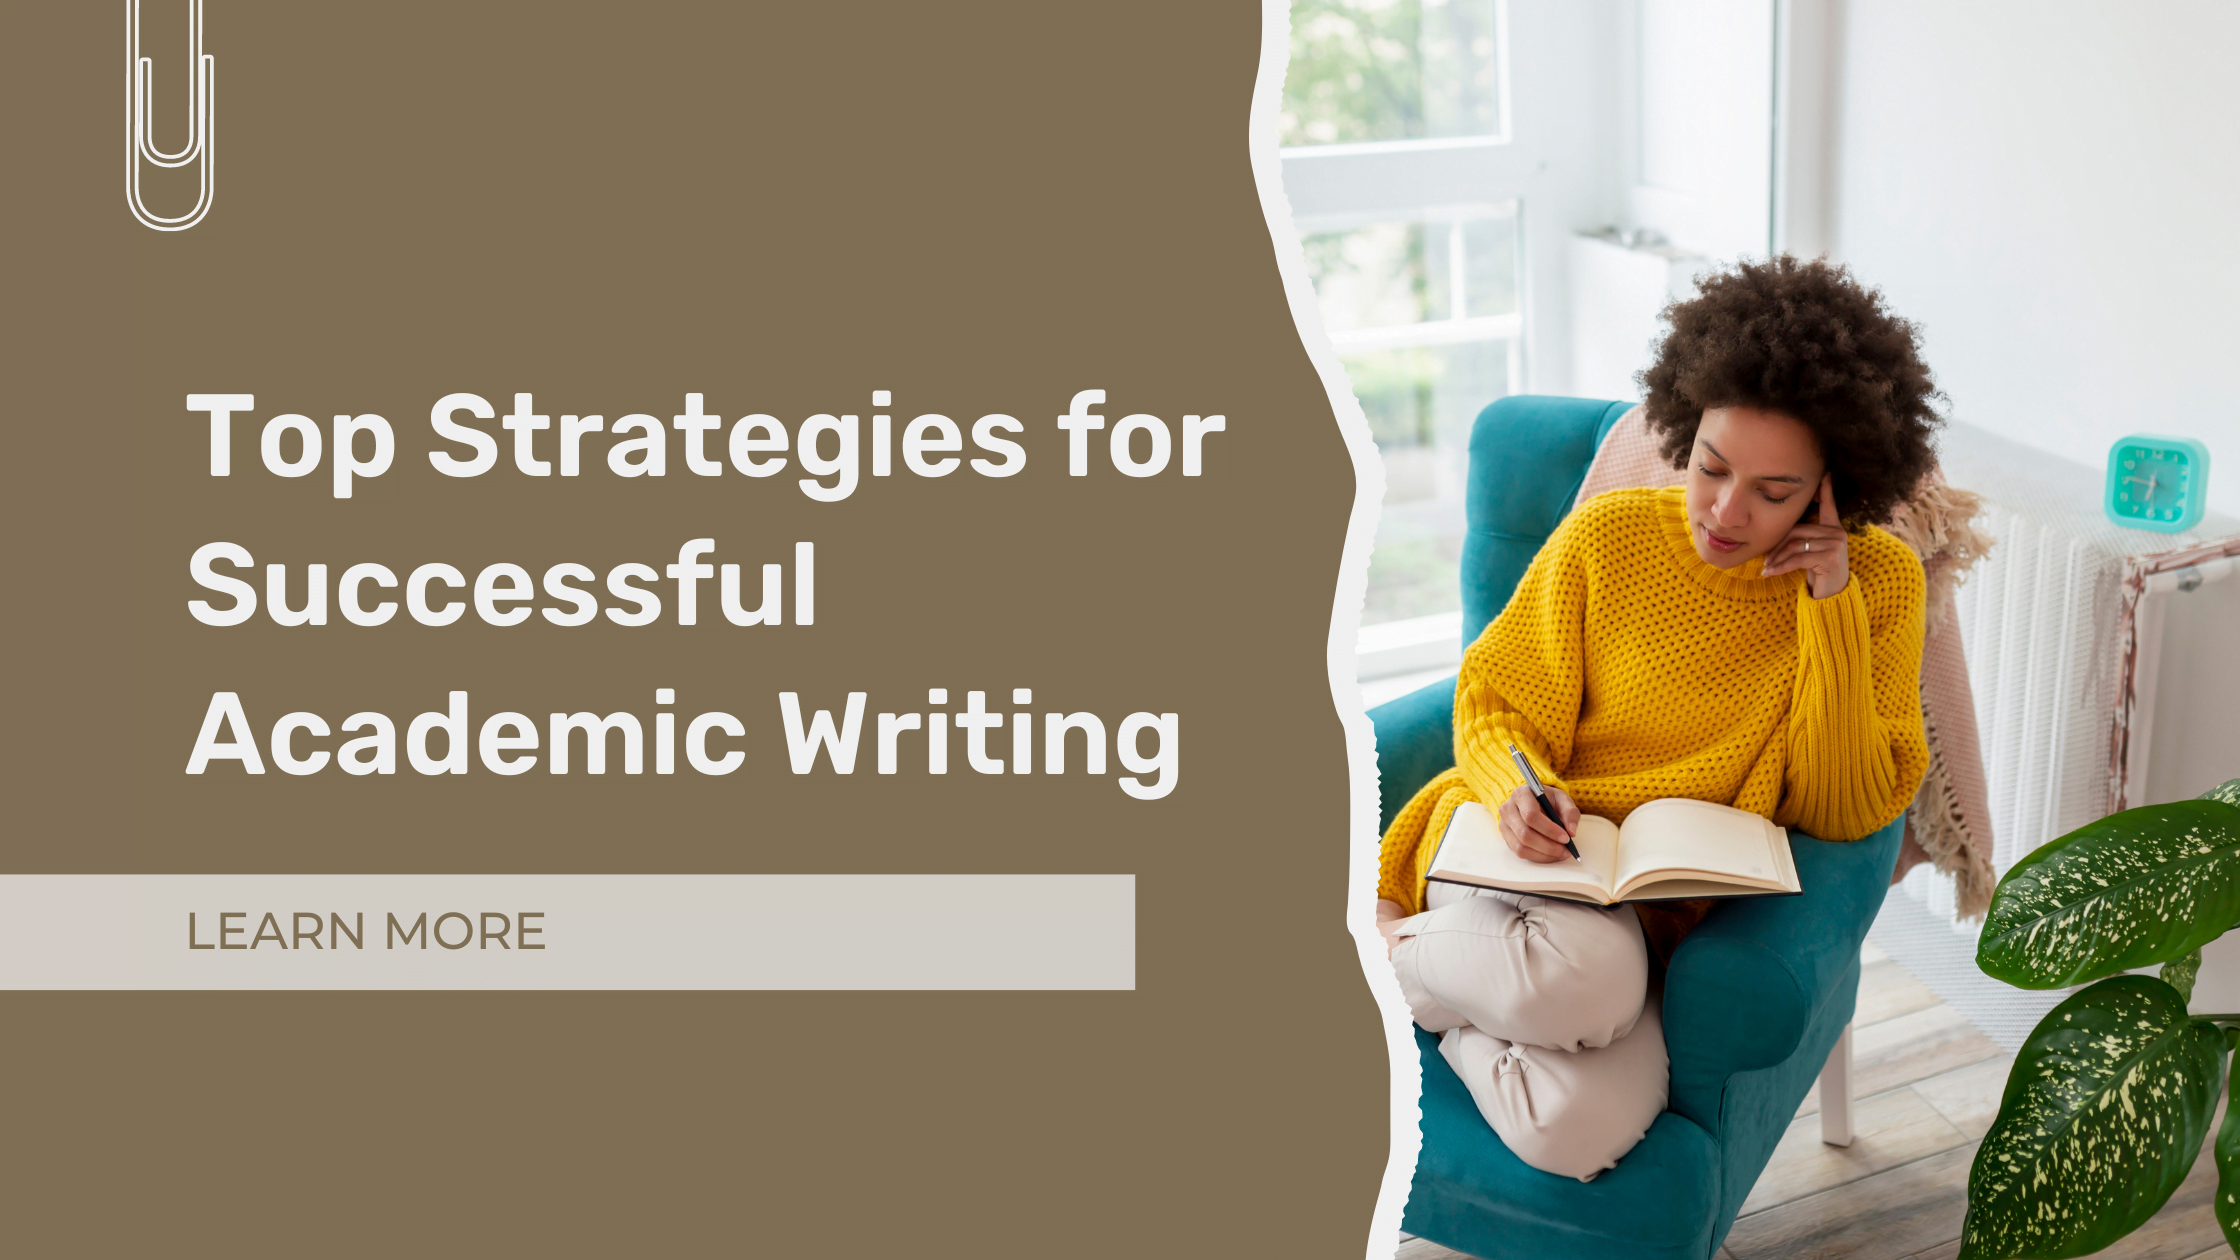 Top Strategies for Successful Academic Writing